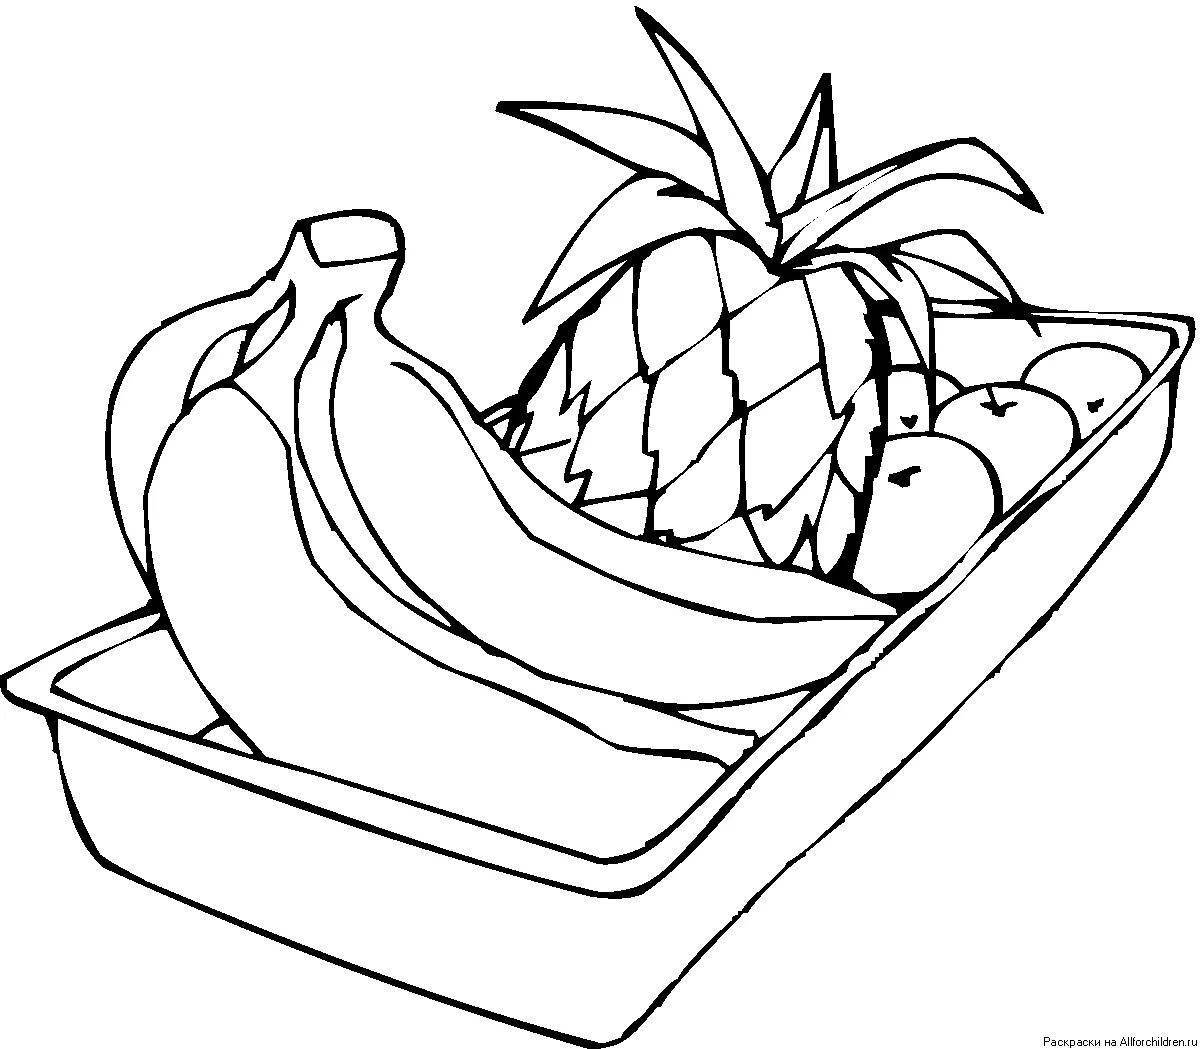 Cute fruit coloring page for kids